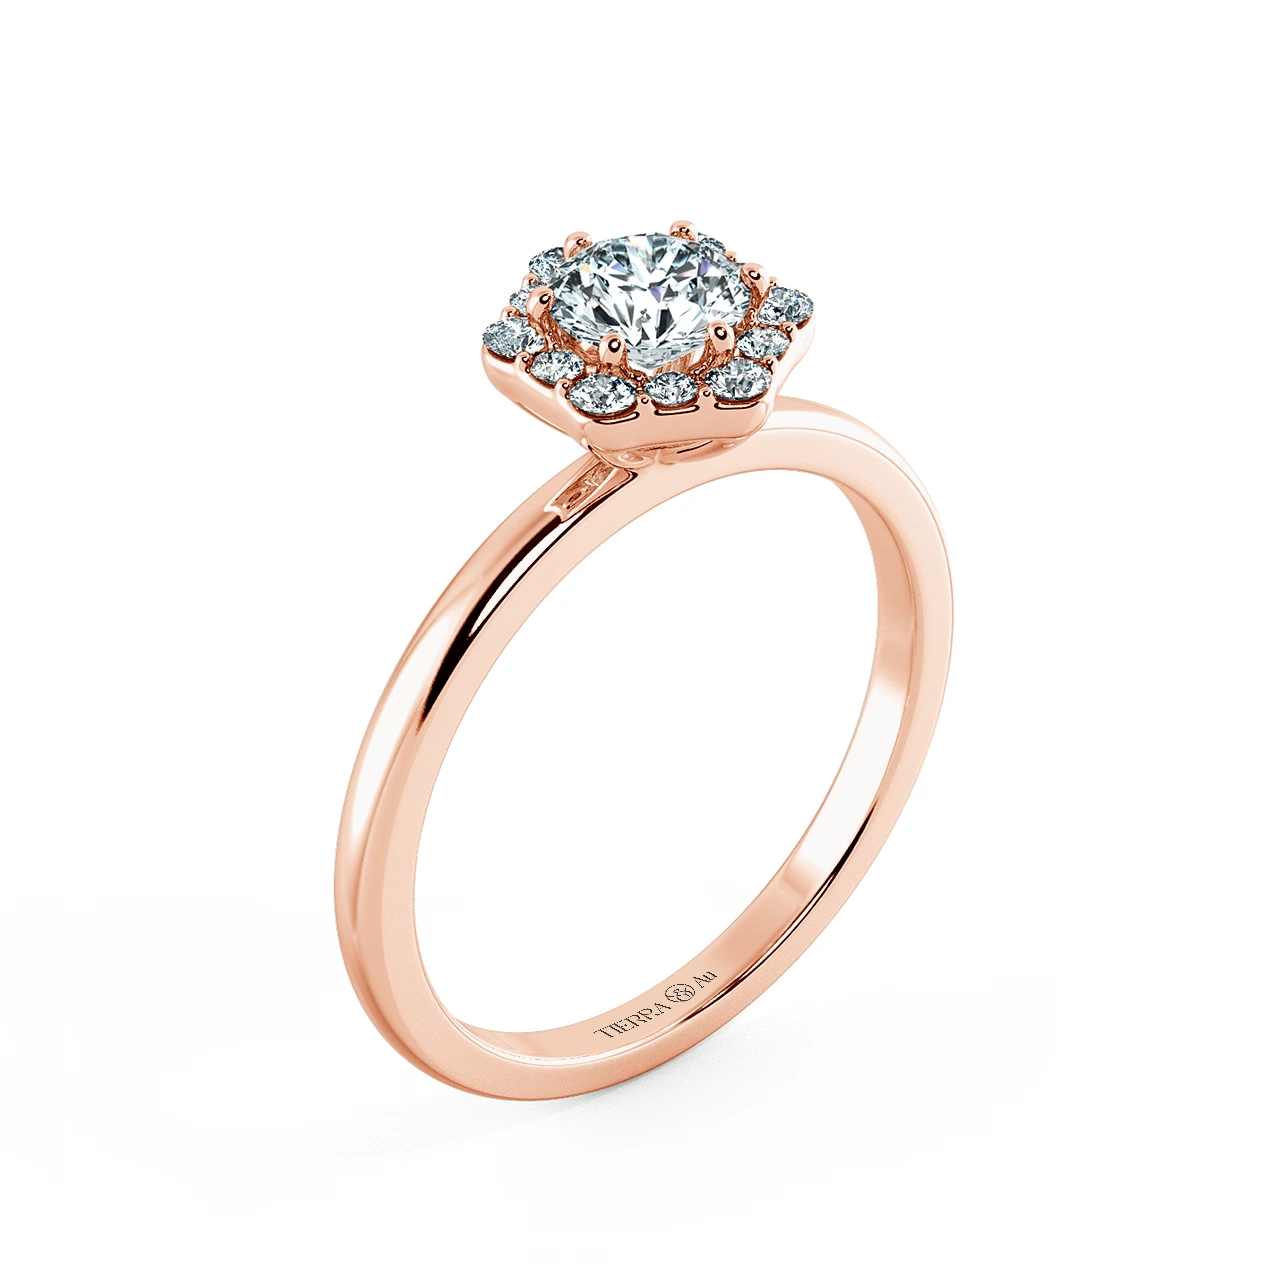 Single Classic Octagonal Halo Engagement Ring NCH2104 4